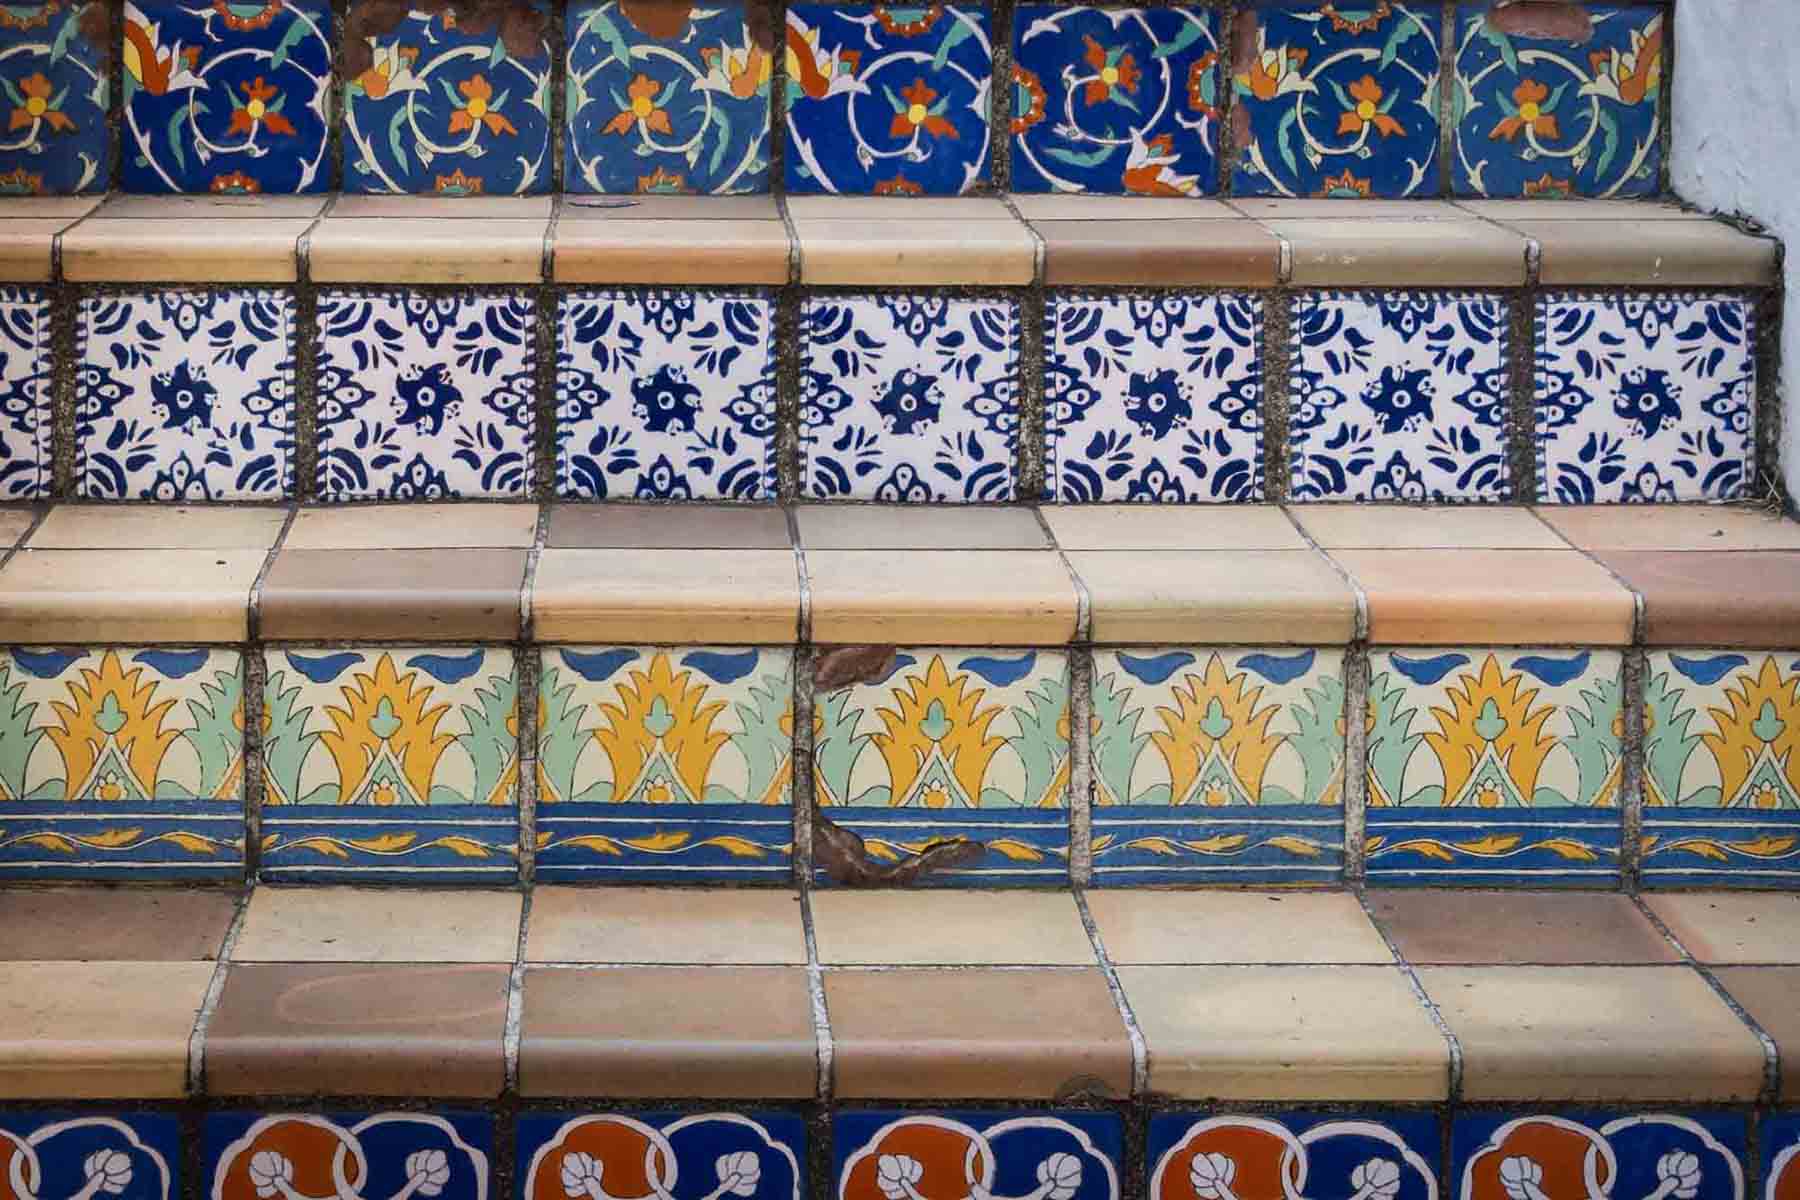 Colorful tiles on a staircase for an article on how to take photos at the McNay Art Museum